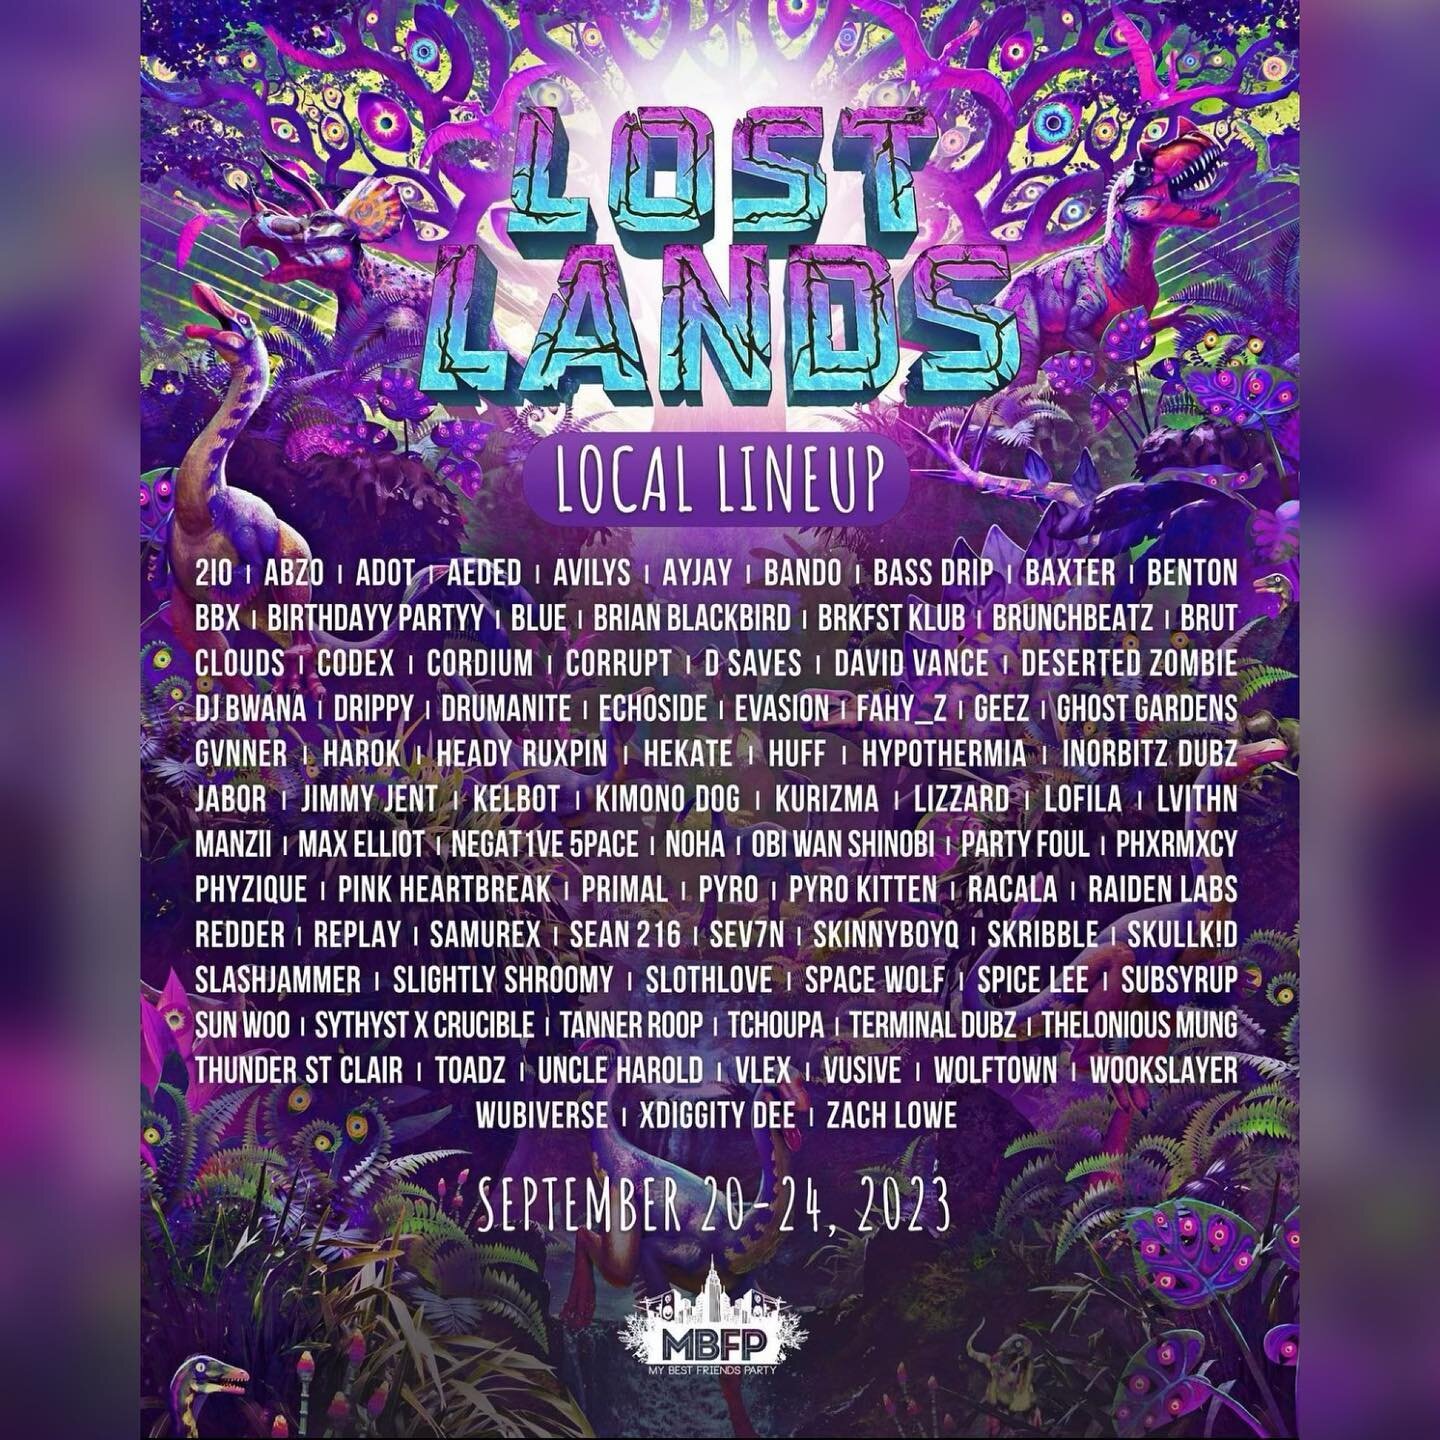 Lost Lands Round 2😈

saturday @ 6am at the Grove Stage

massive shoutout to @mybestfriendsparty and @excisionpresents for having me out

we got an absolute homie fest at the Grove Stage Silent Disco, pop out for 24/7 vibes all weekend

#LostLands #C